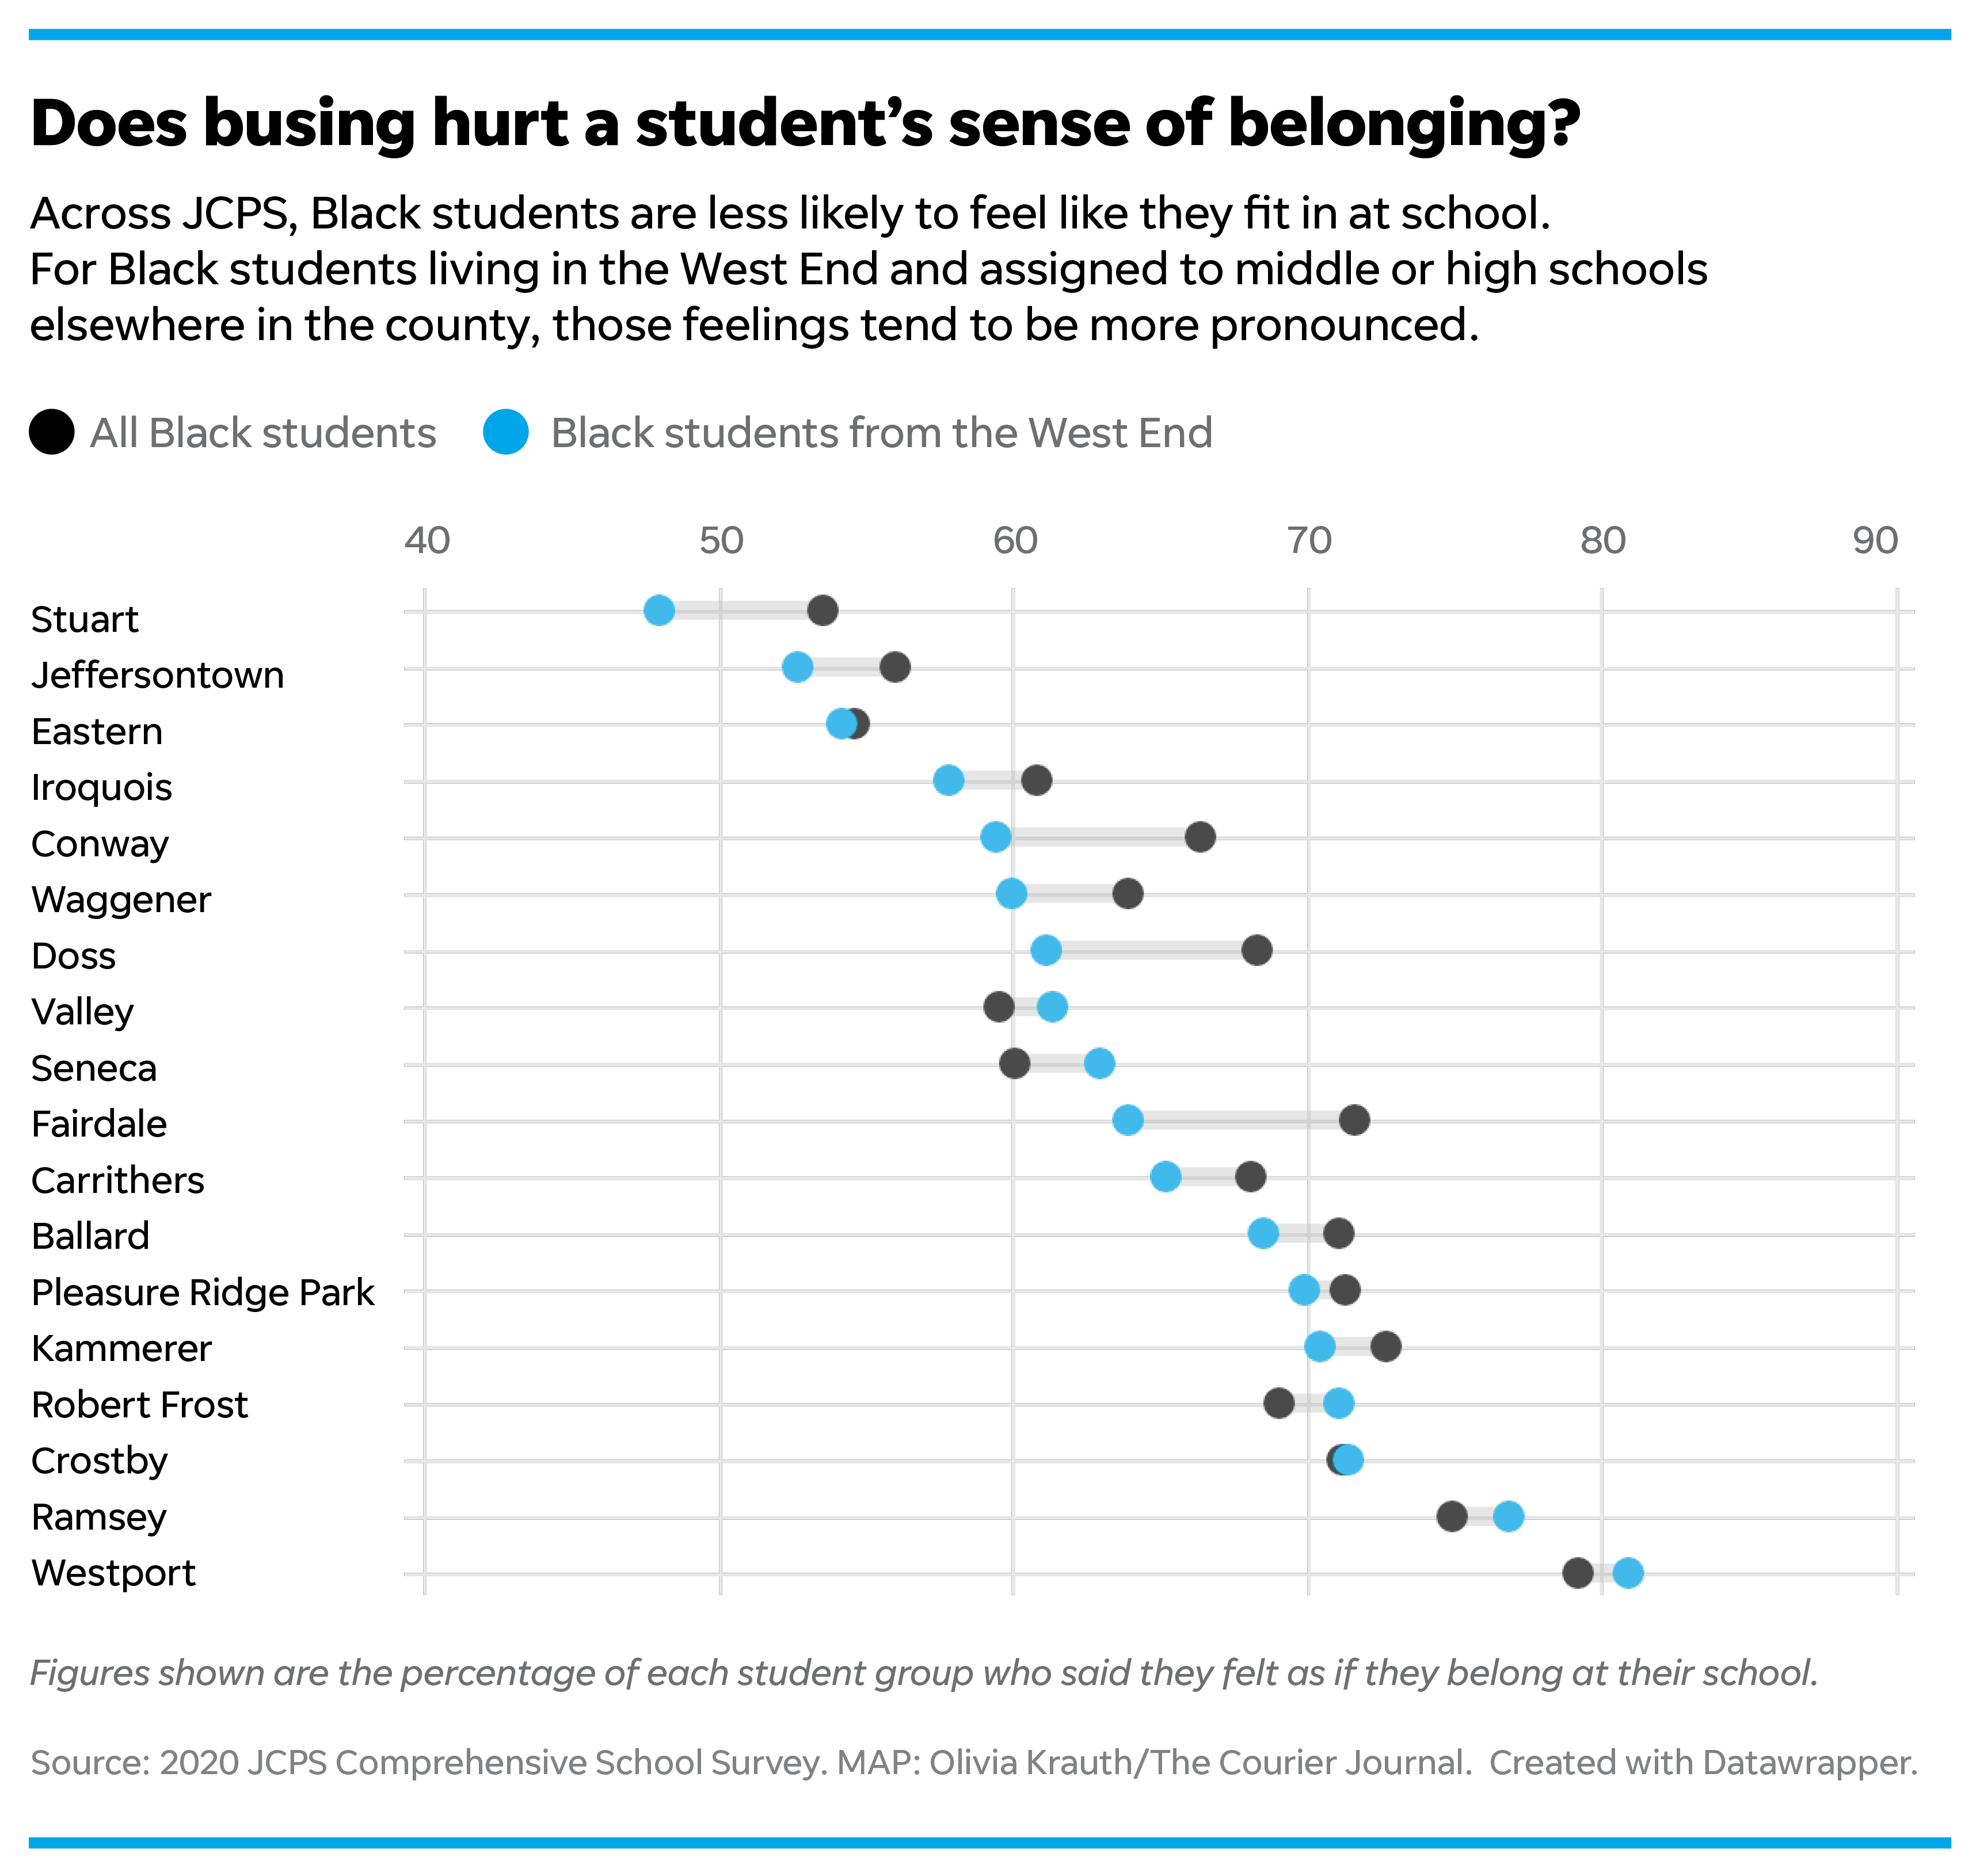 Does busing hurt a student's sense of belonging